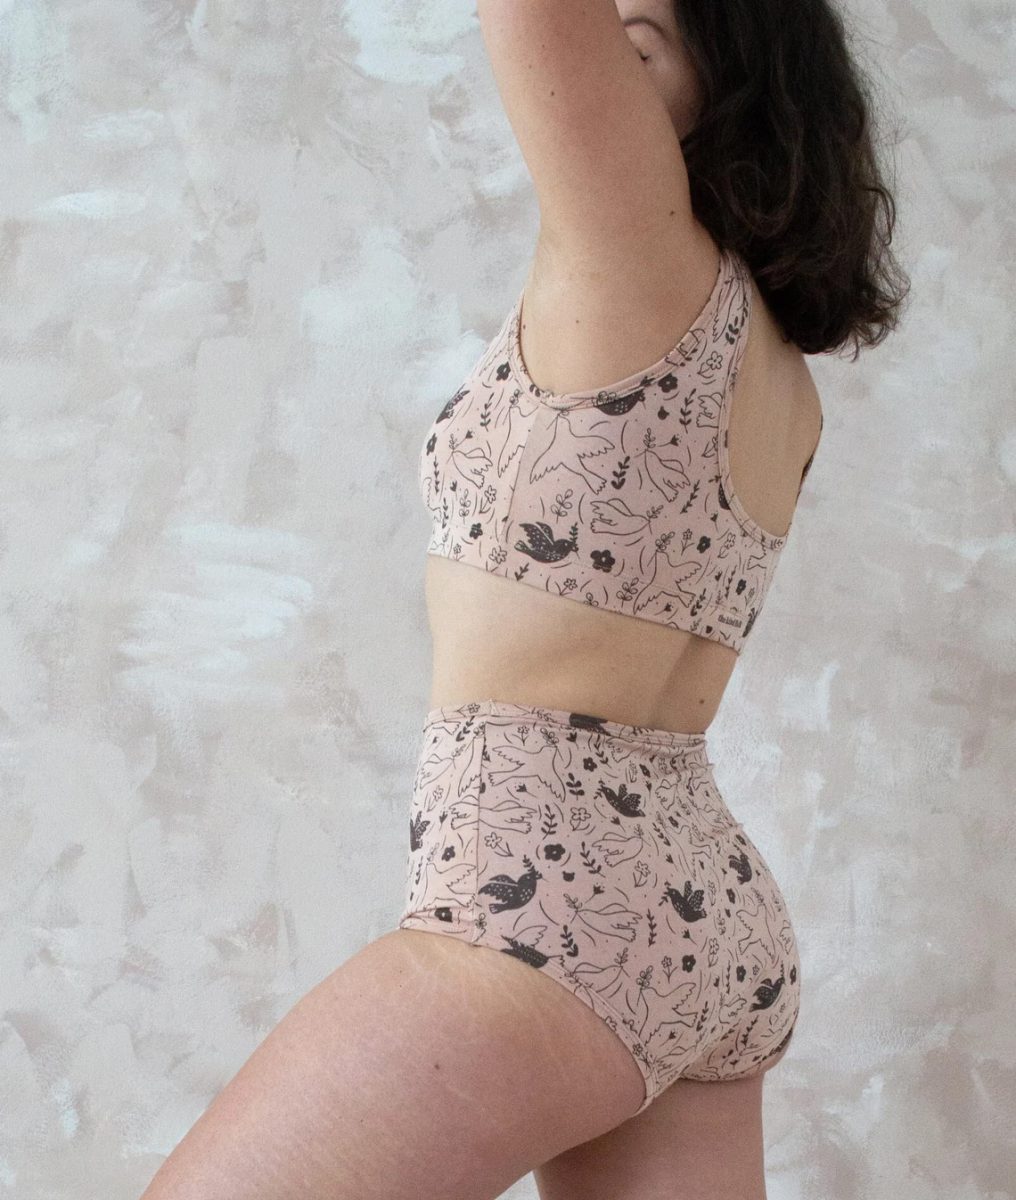 Plant-Dyed Lingerie: 10 Brands to Know